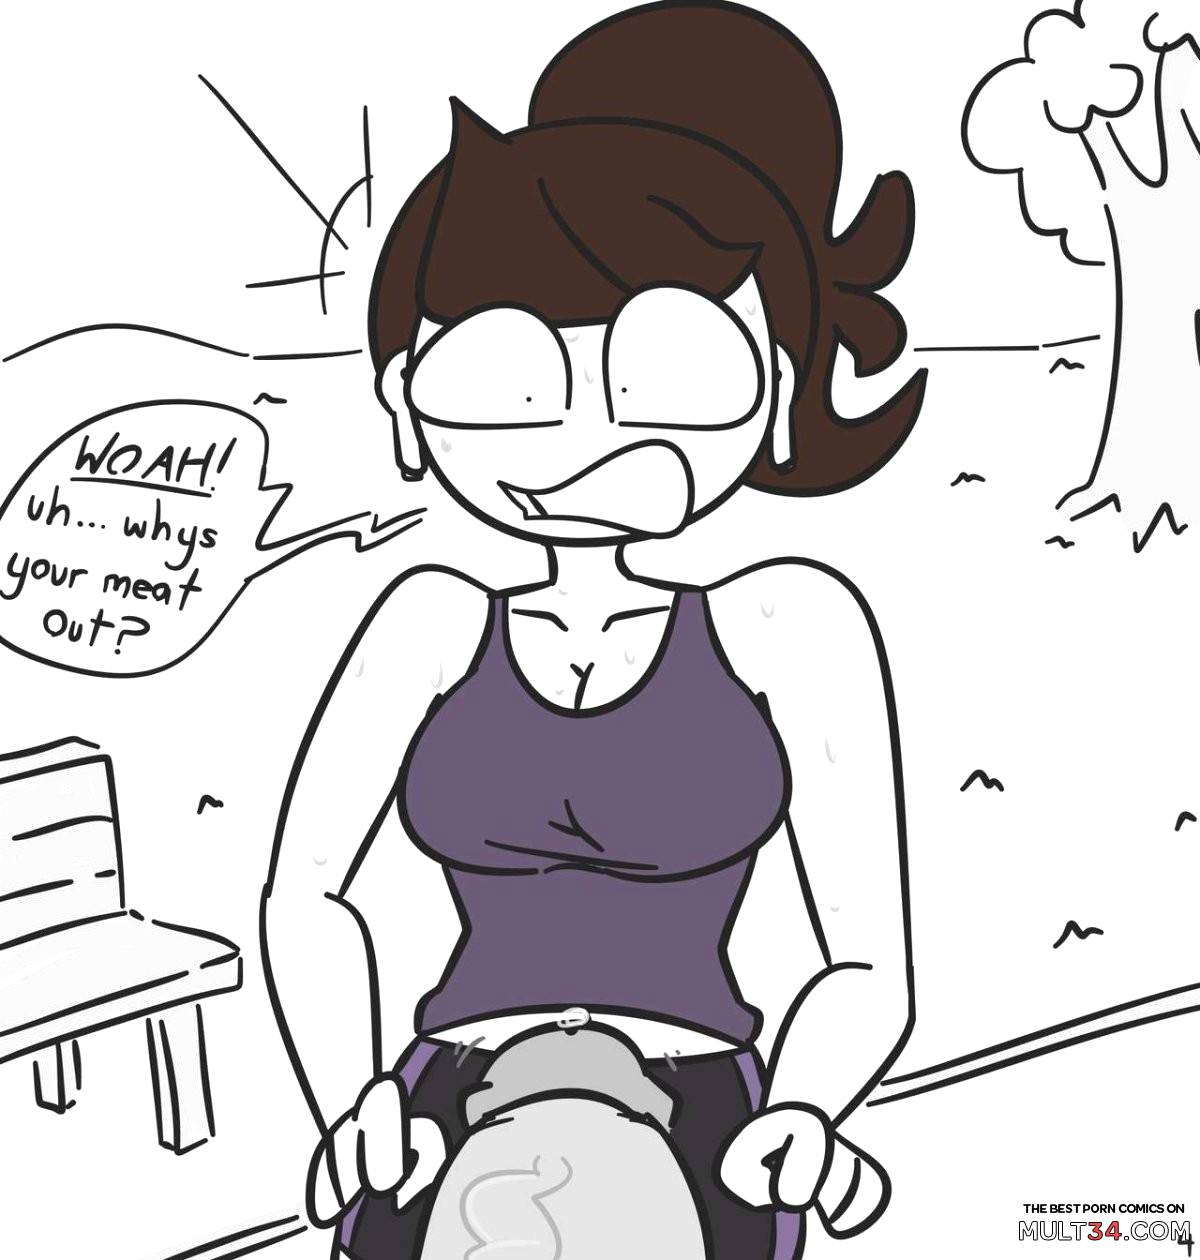 jaiden goes jogging page 5